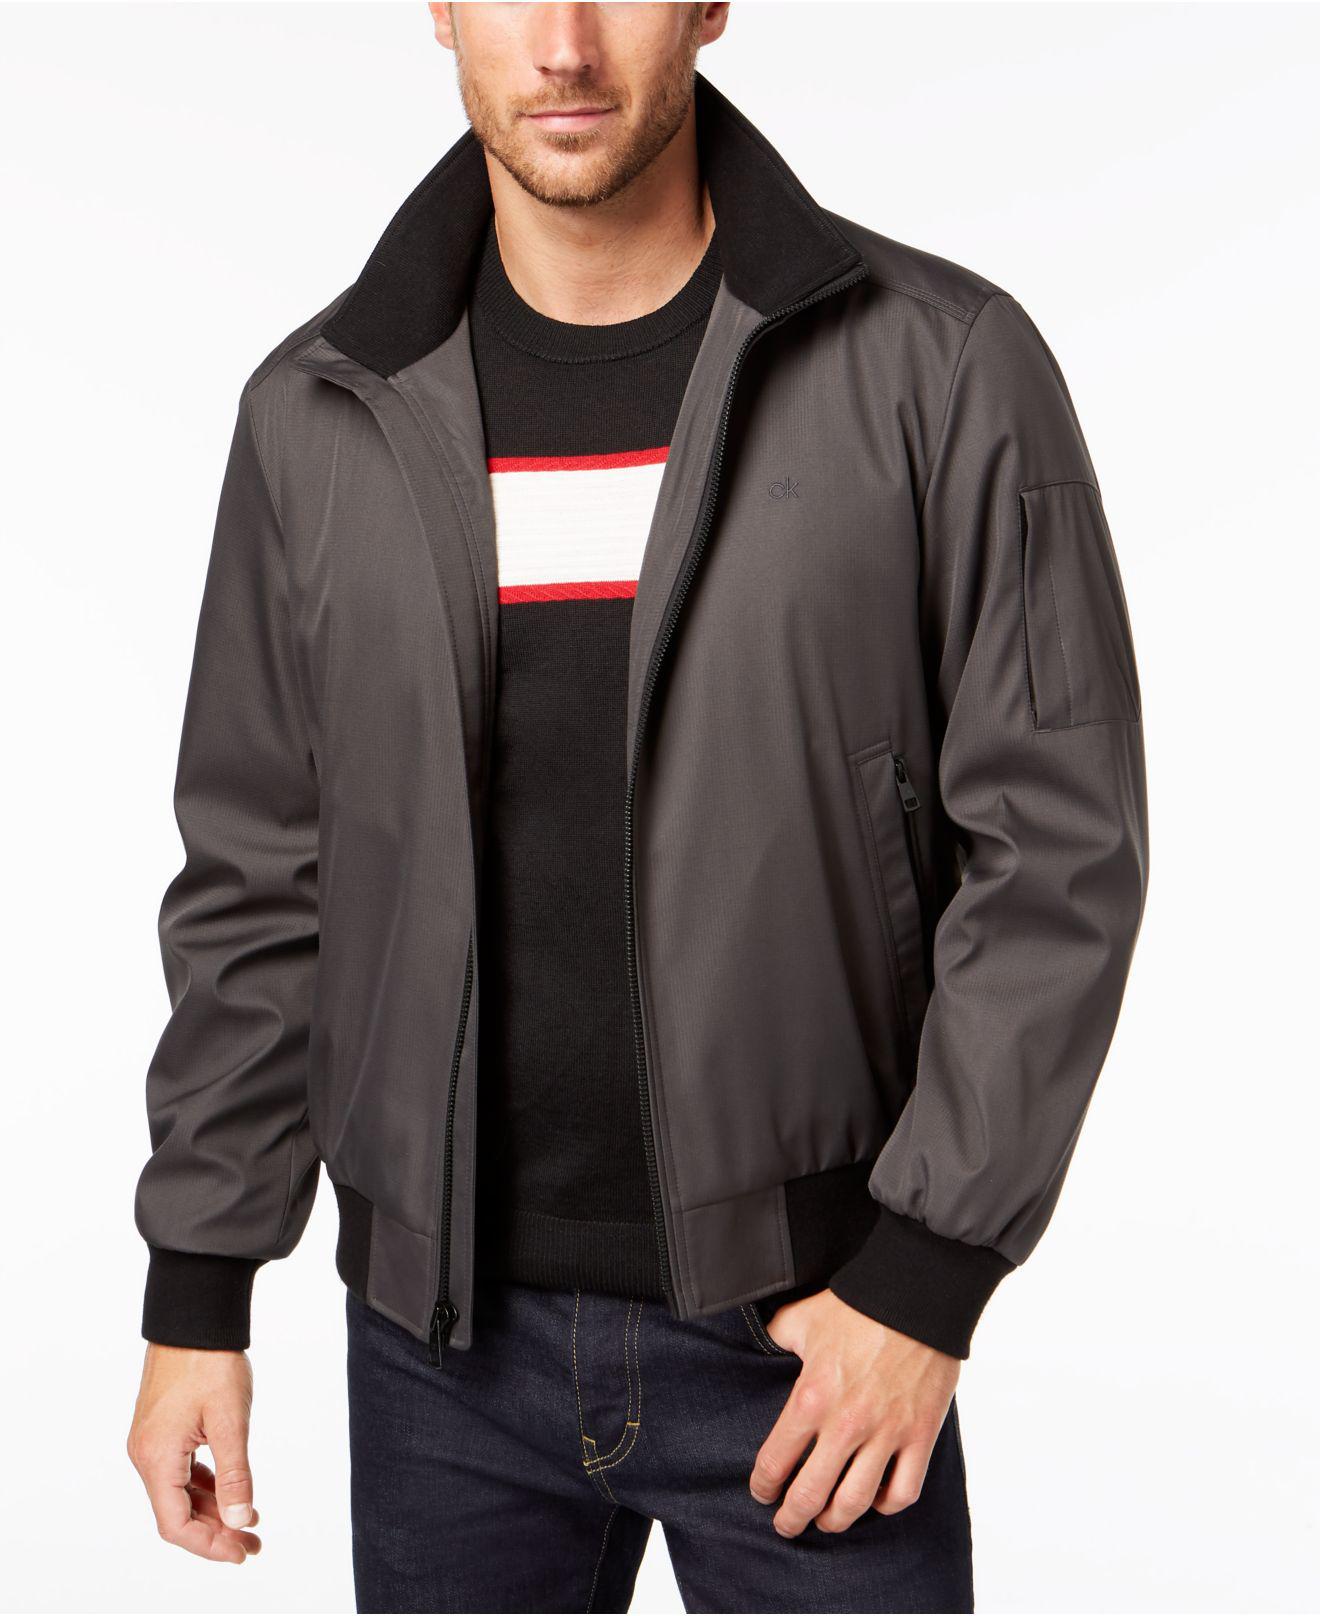 Calvin Klein Synthetic Ripstop Bomber Jacket in Gray for Men - Lyst